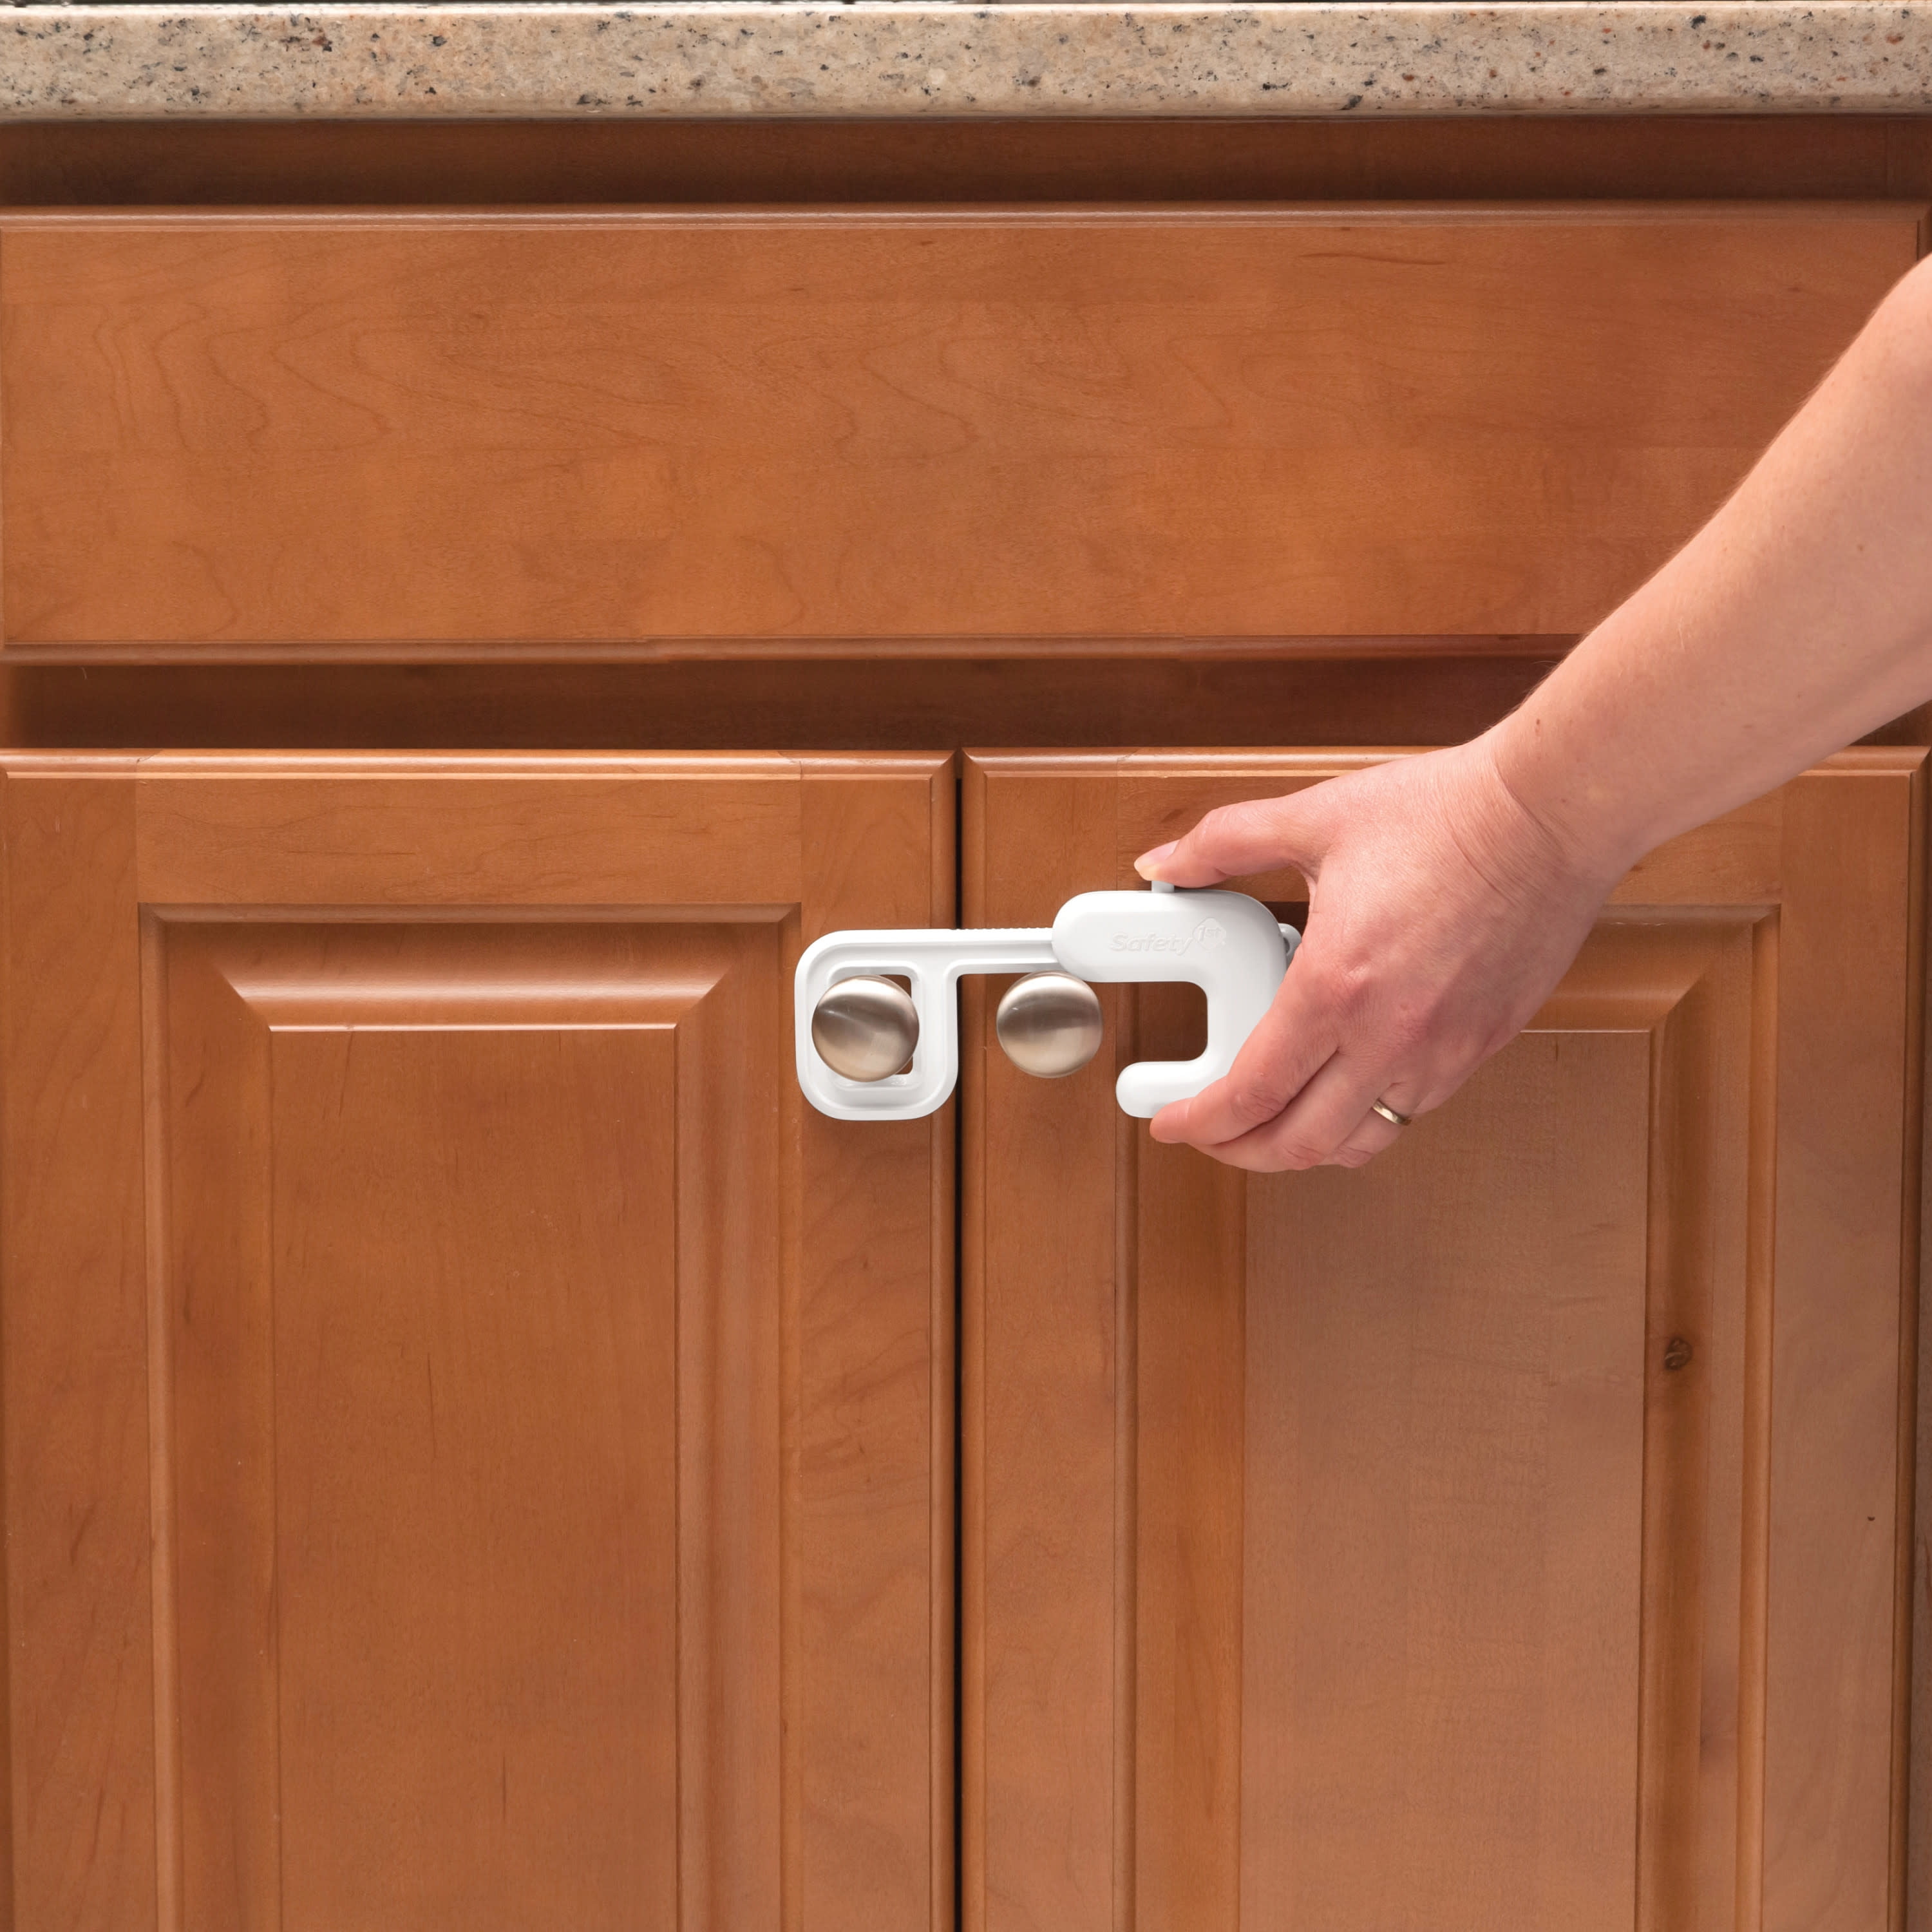 Safety 1st Cabinet Lock - Suitable for all cabinet doors! unisex